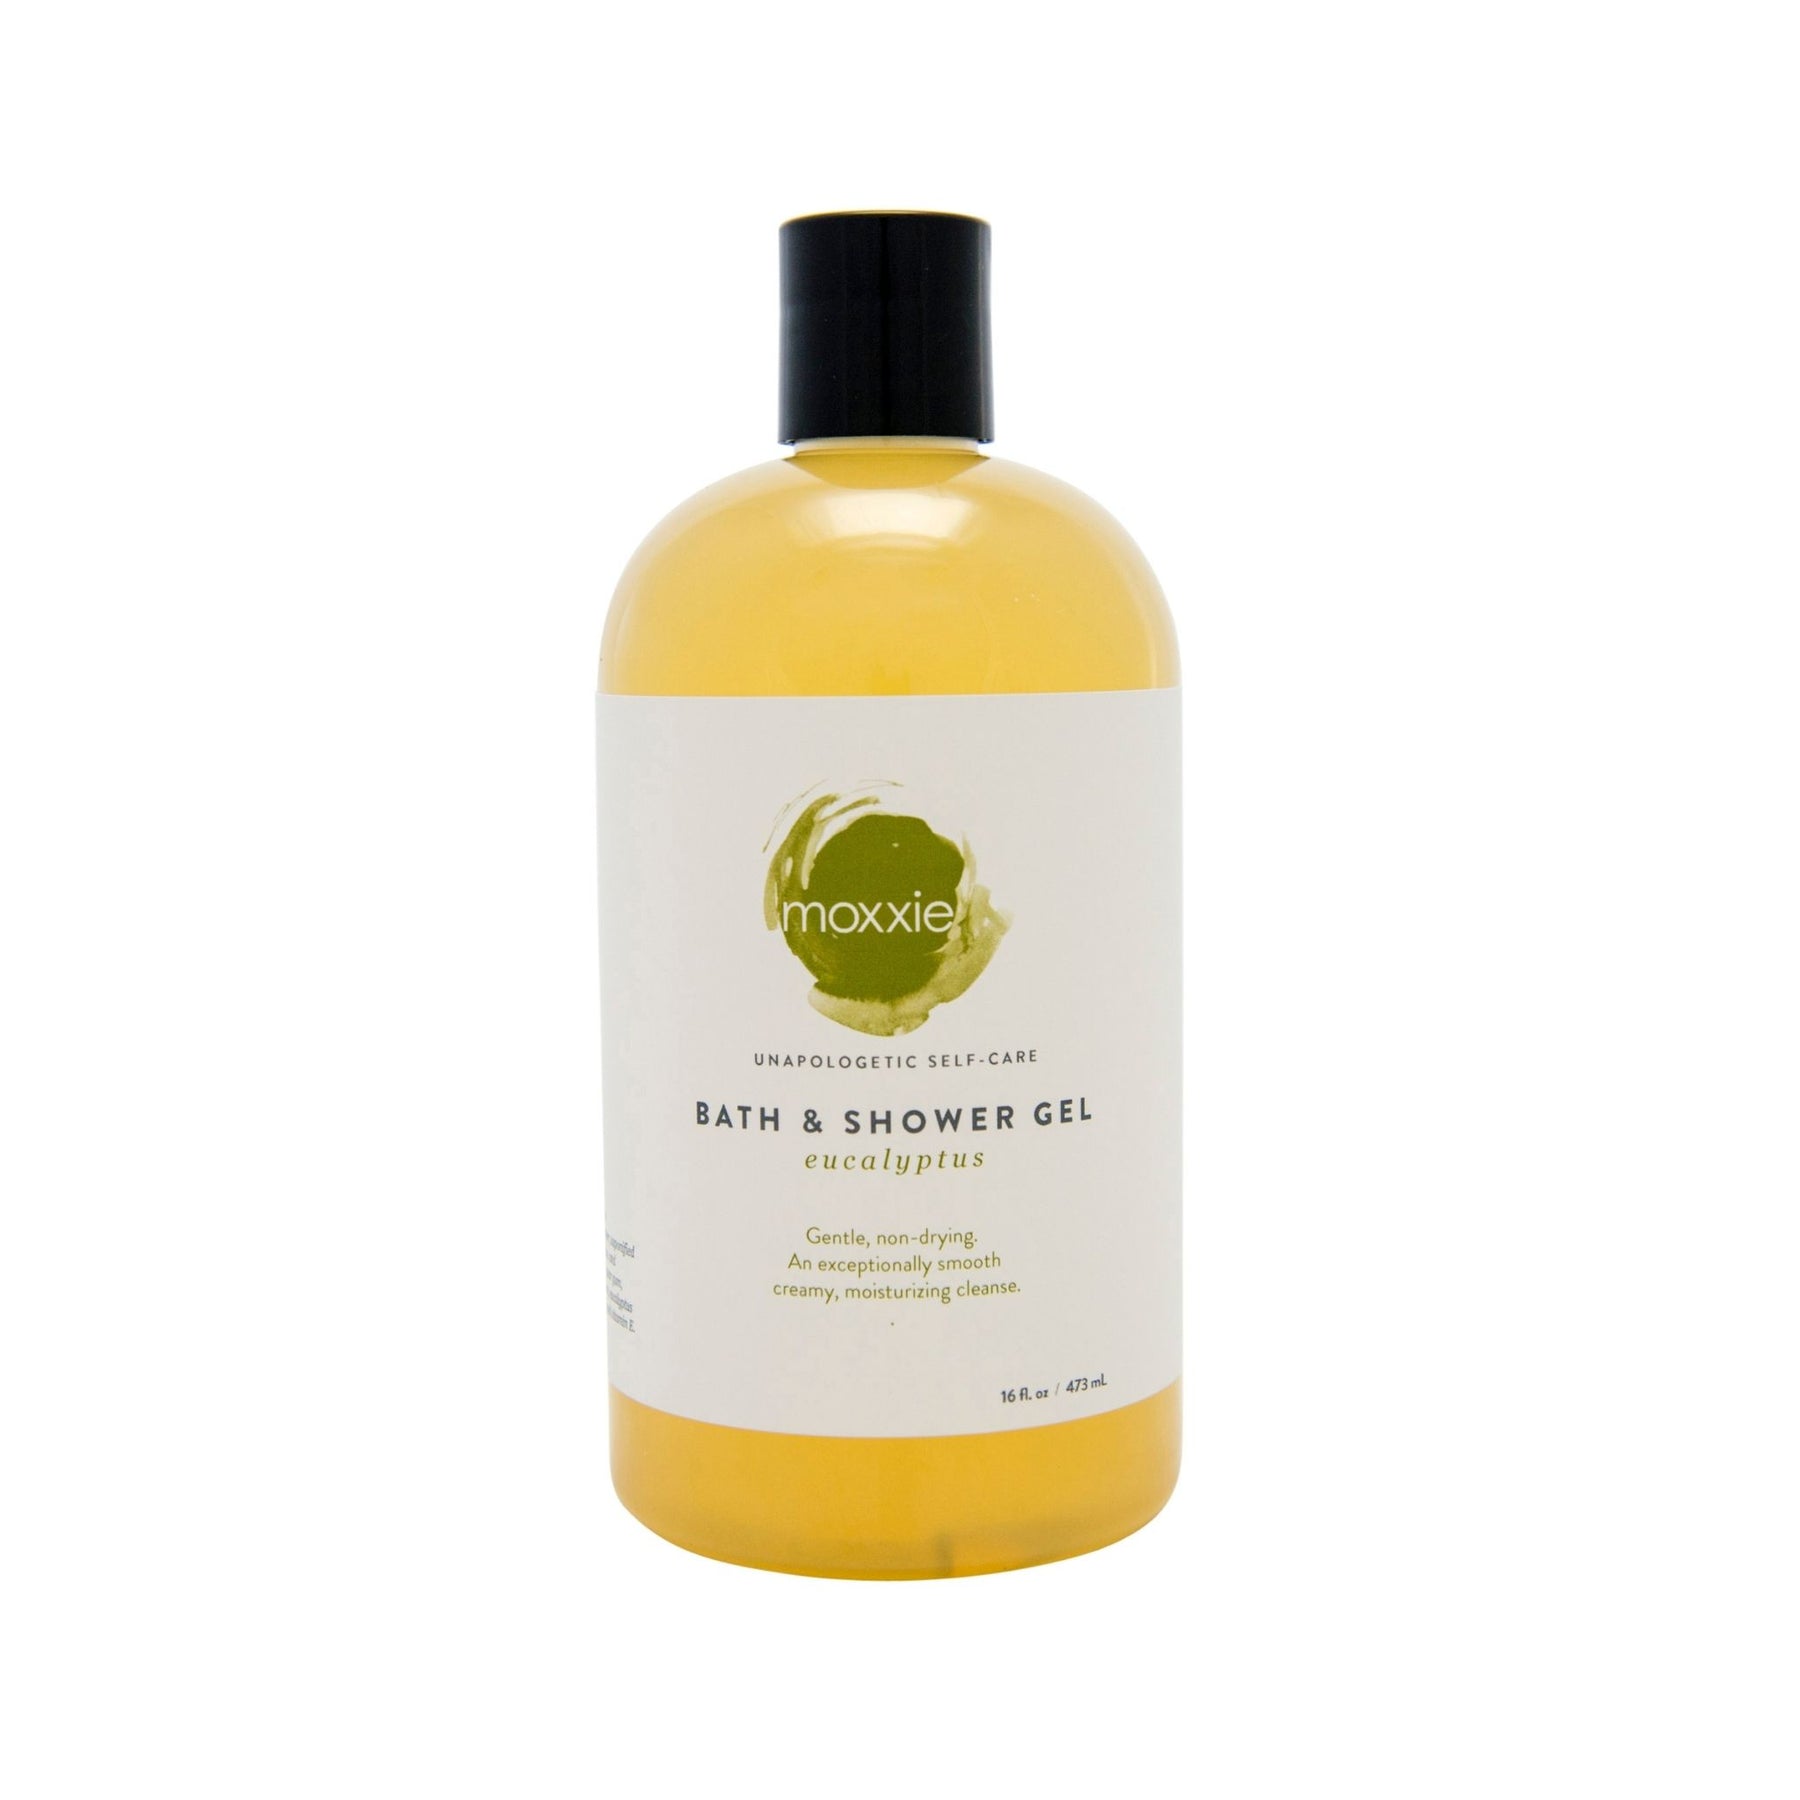 Moxxie all natural bath and shower gel in eucalyptus scent. Handcrafted in the USA for a gentle and satisfying cleanse